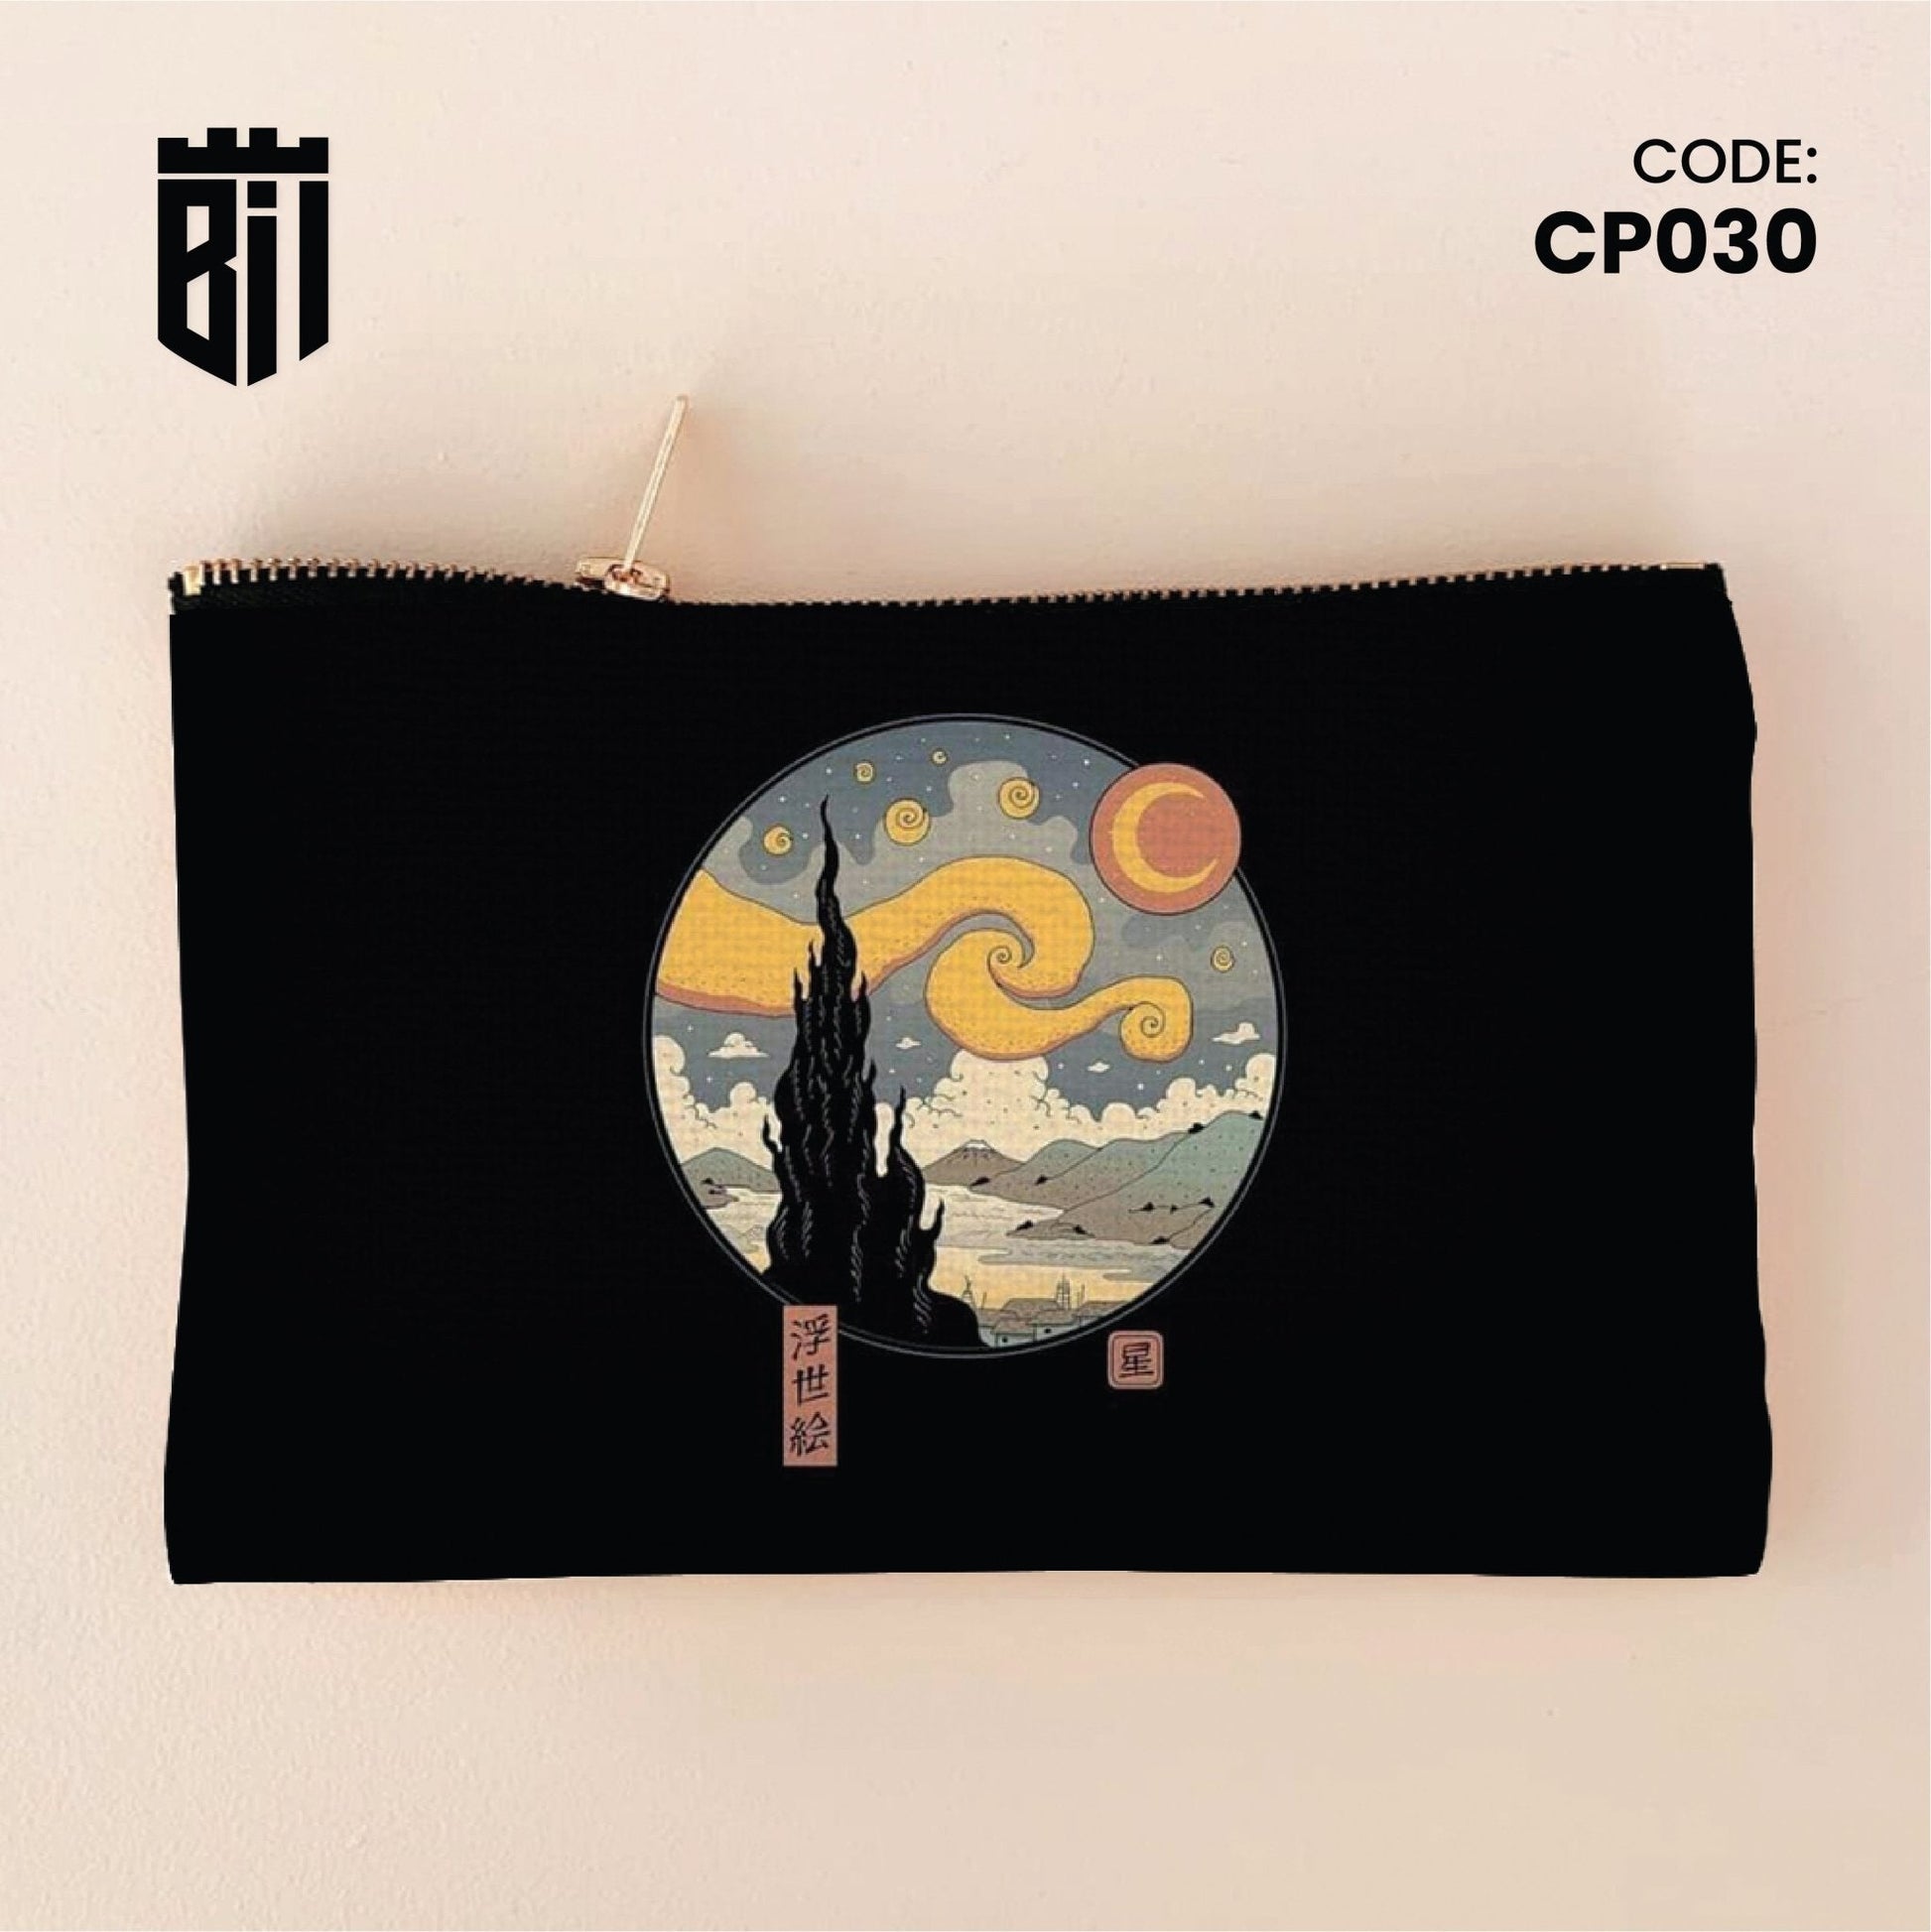 CP030 - Starry Night Customized Pouch - BREACHIT